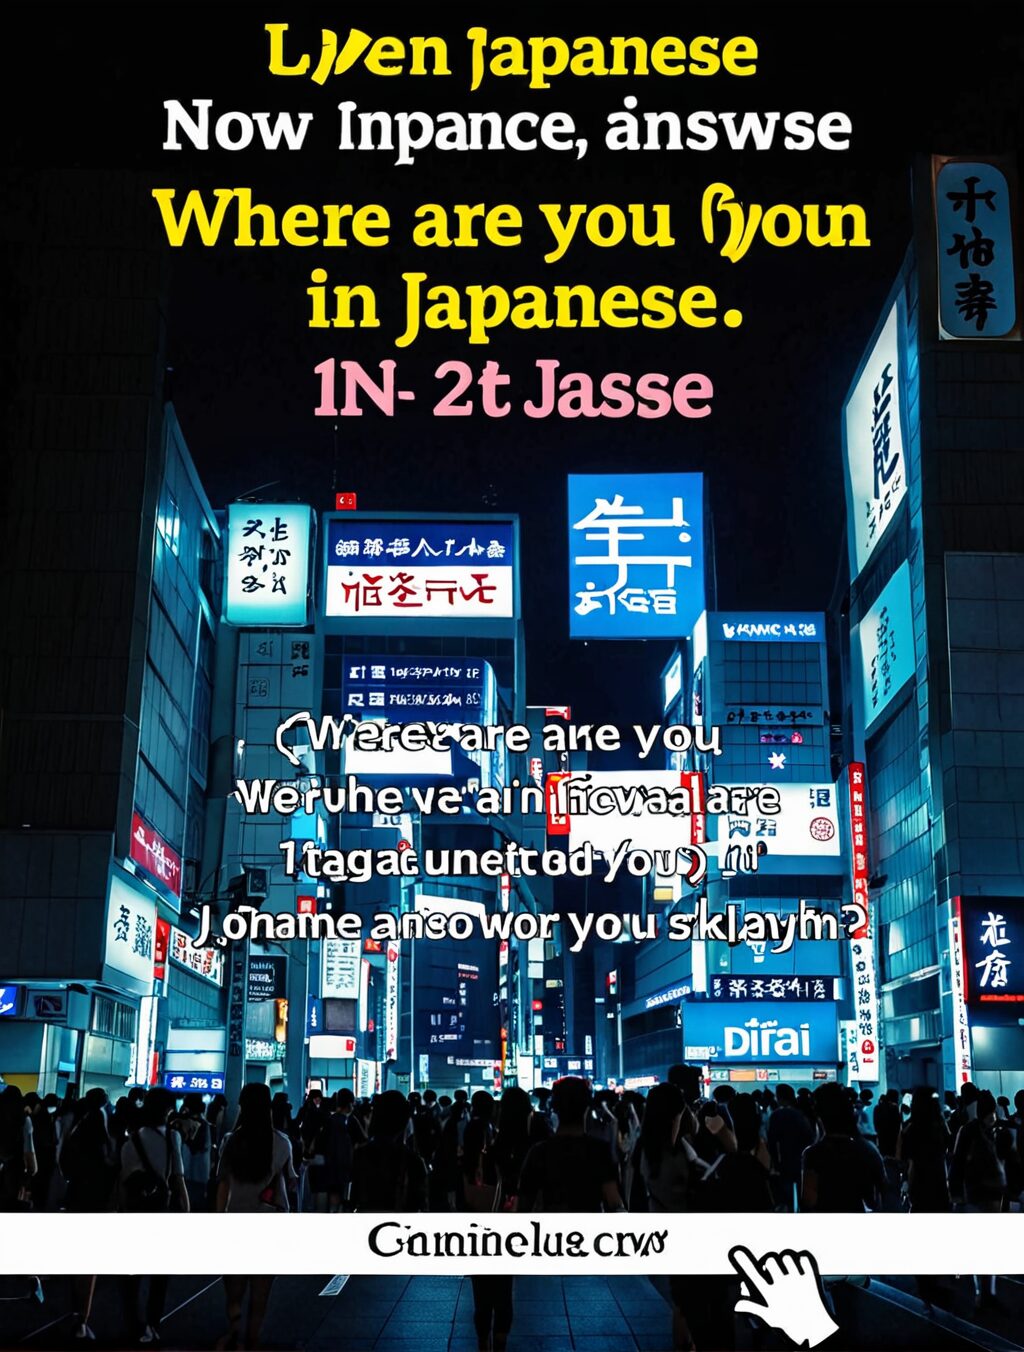 where are you in japanese